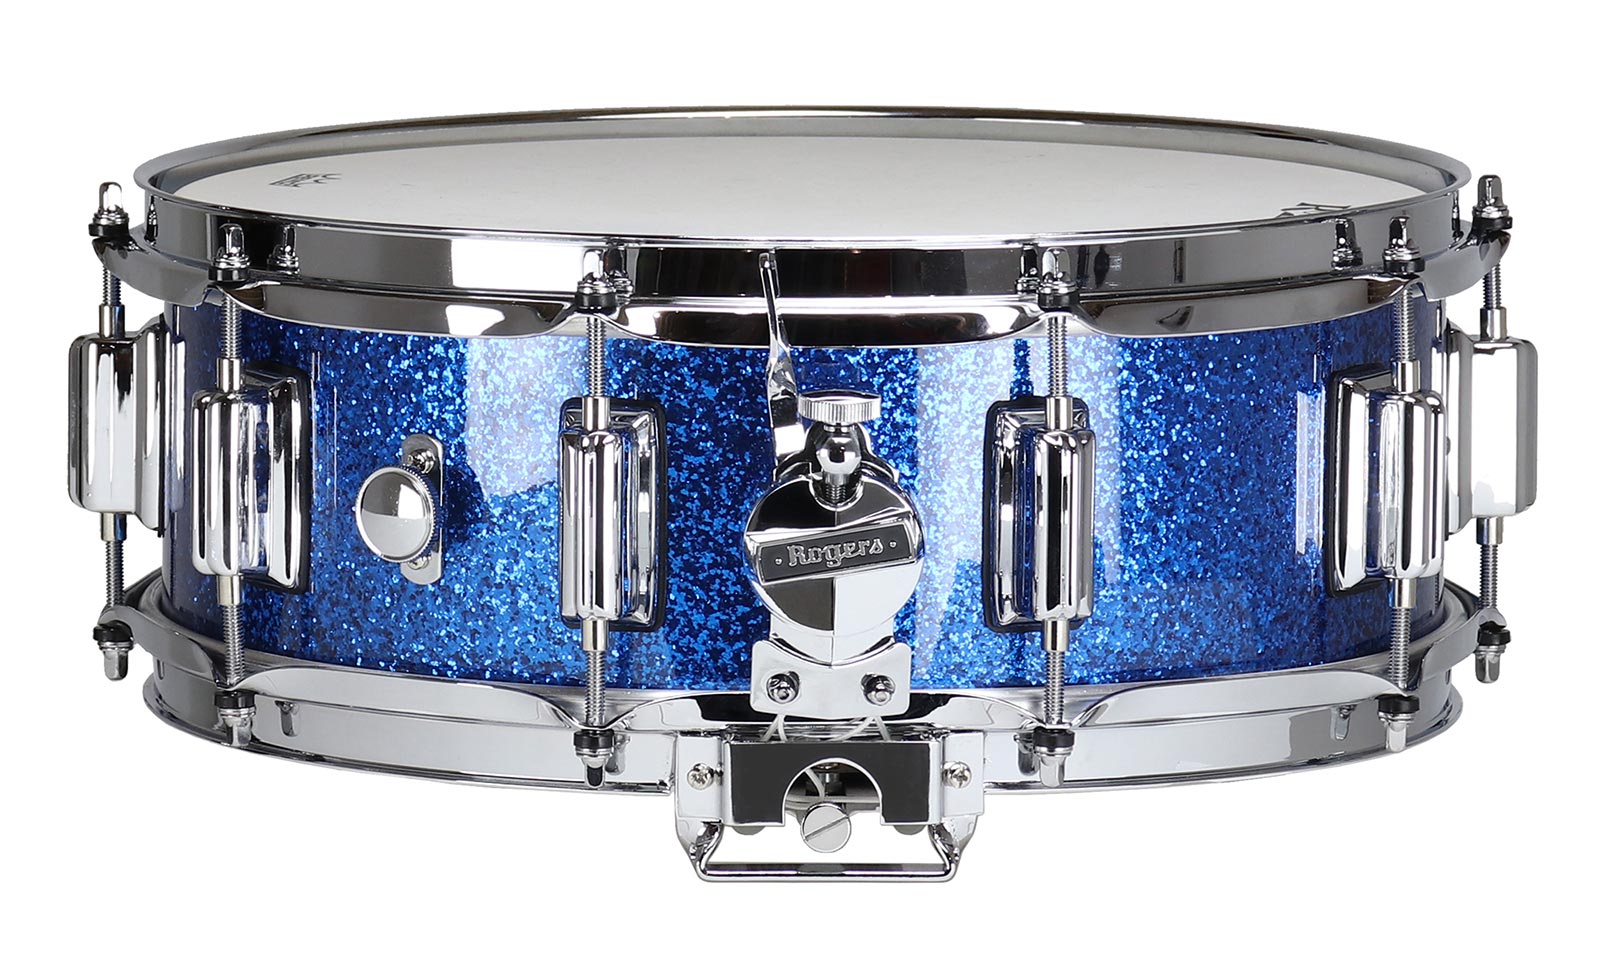 ROGERS DRUMS DYNA-SONIC 14X5 36-BSL BLUE SPARKLE BEAVERTAIL